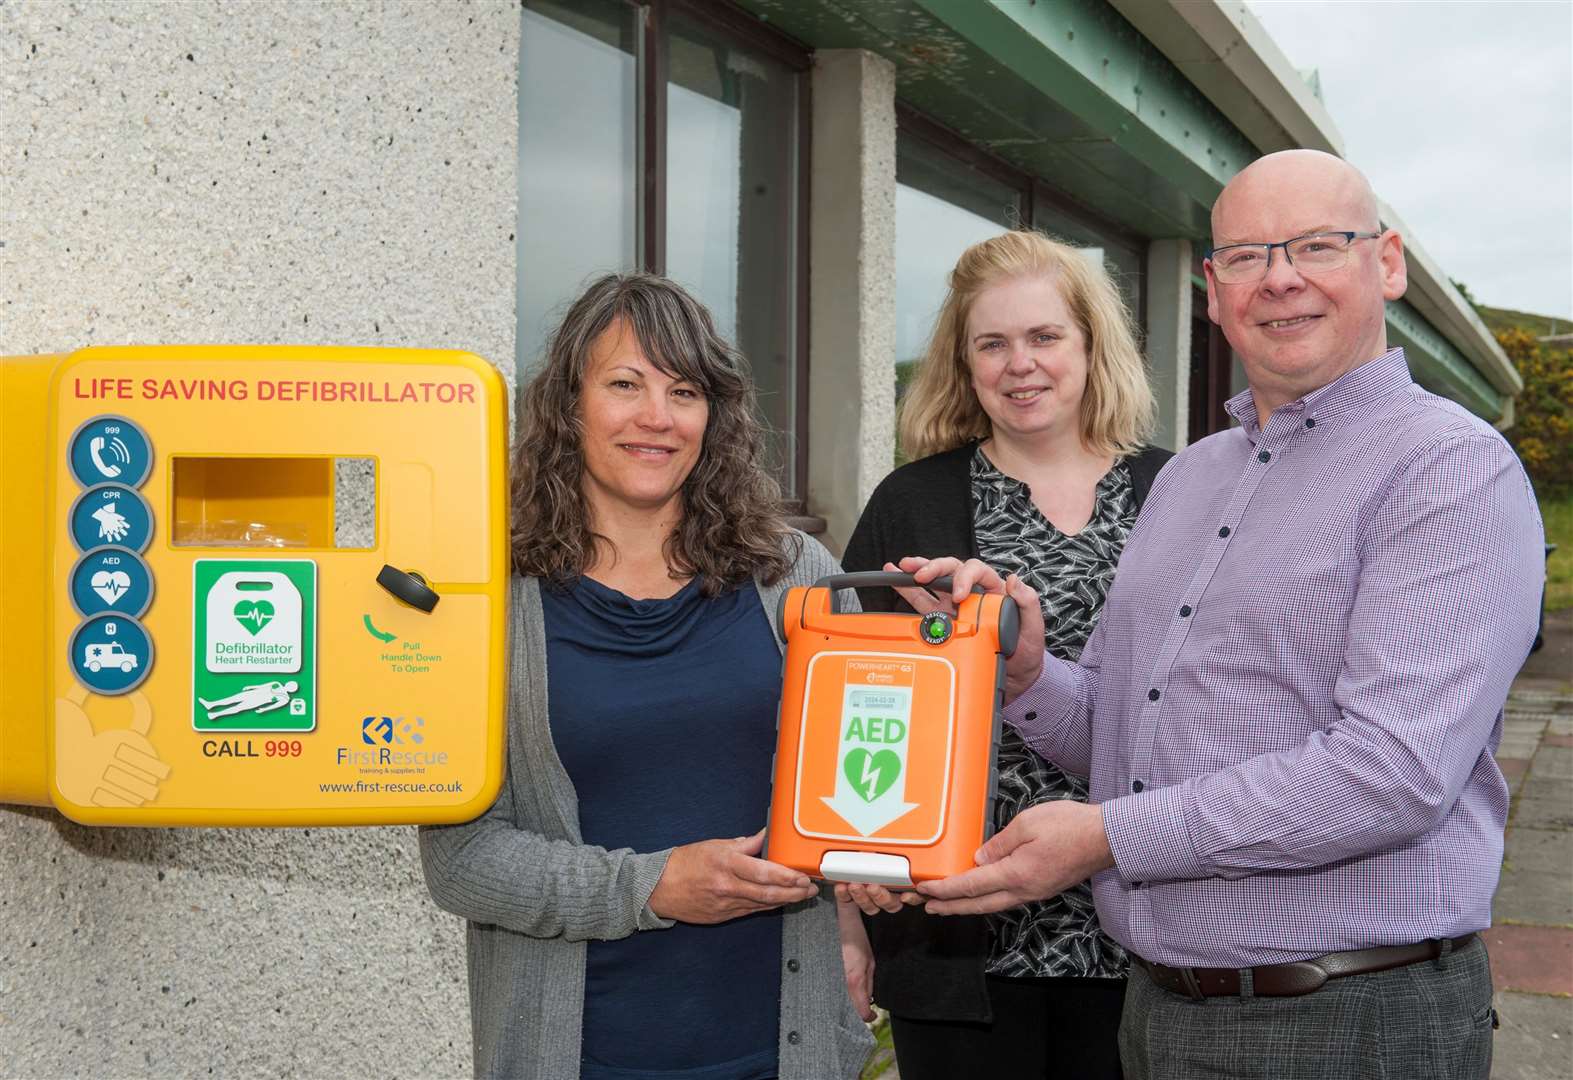 At Strathy village hall with the defibrillator (from left) school nurse Janelle Spratt; Carol-Anne Farquhar, Strathy hall committee chairperson; and SSE Renewables community fund manager David Shearer. Picture: Mike Roper